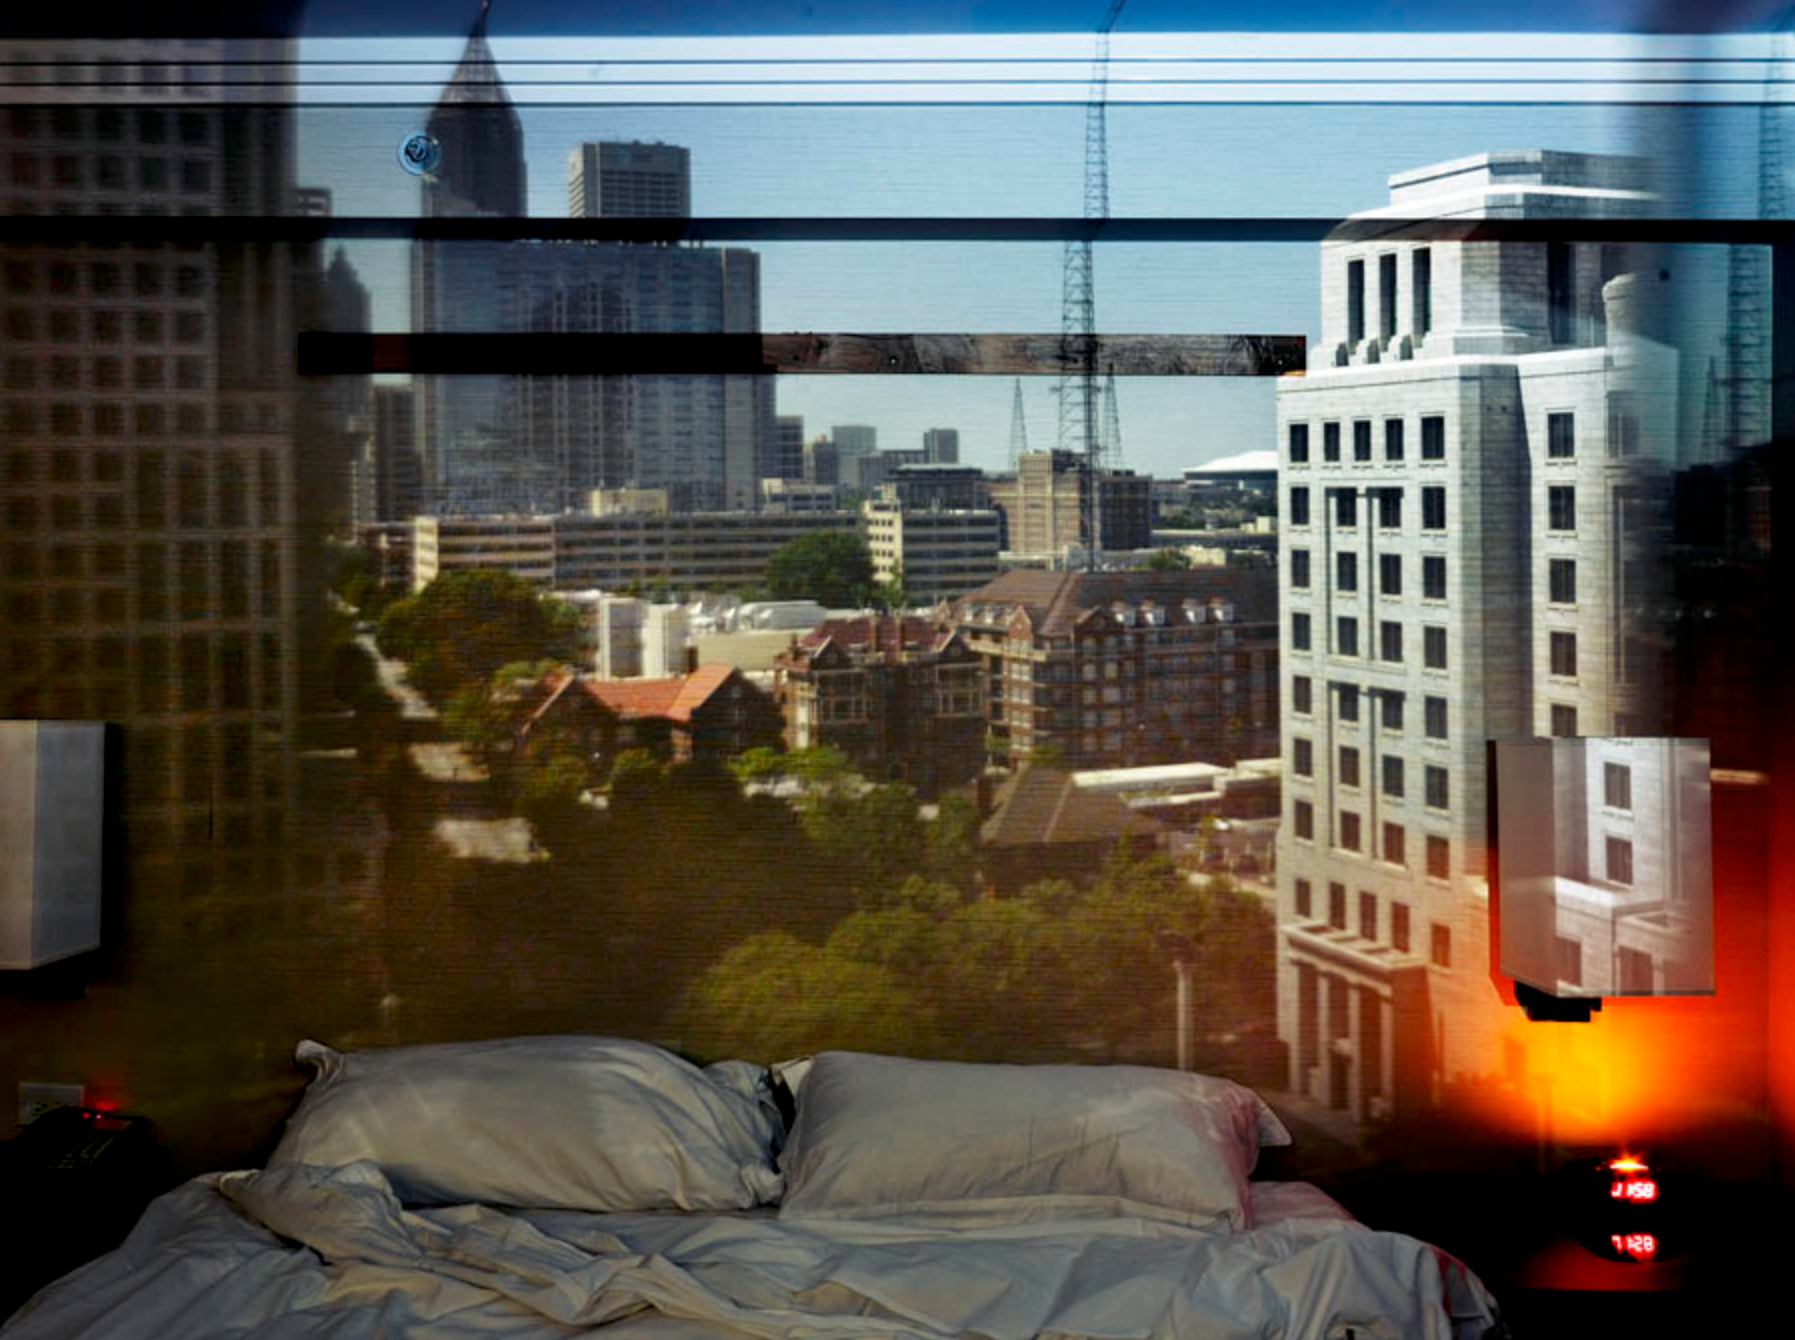 “Camera Obscura: View of Atlanta Looking South Down Peachtree Street in Hotel Room, 2013.”